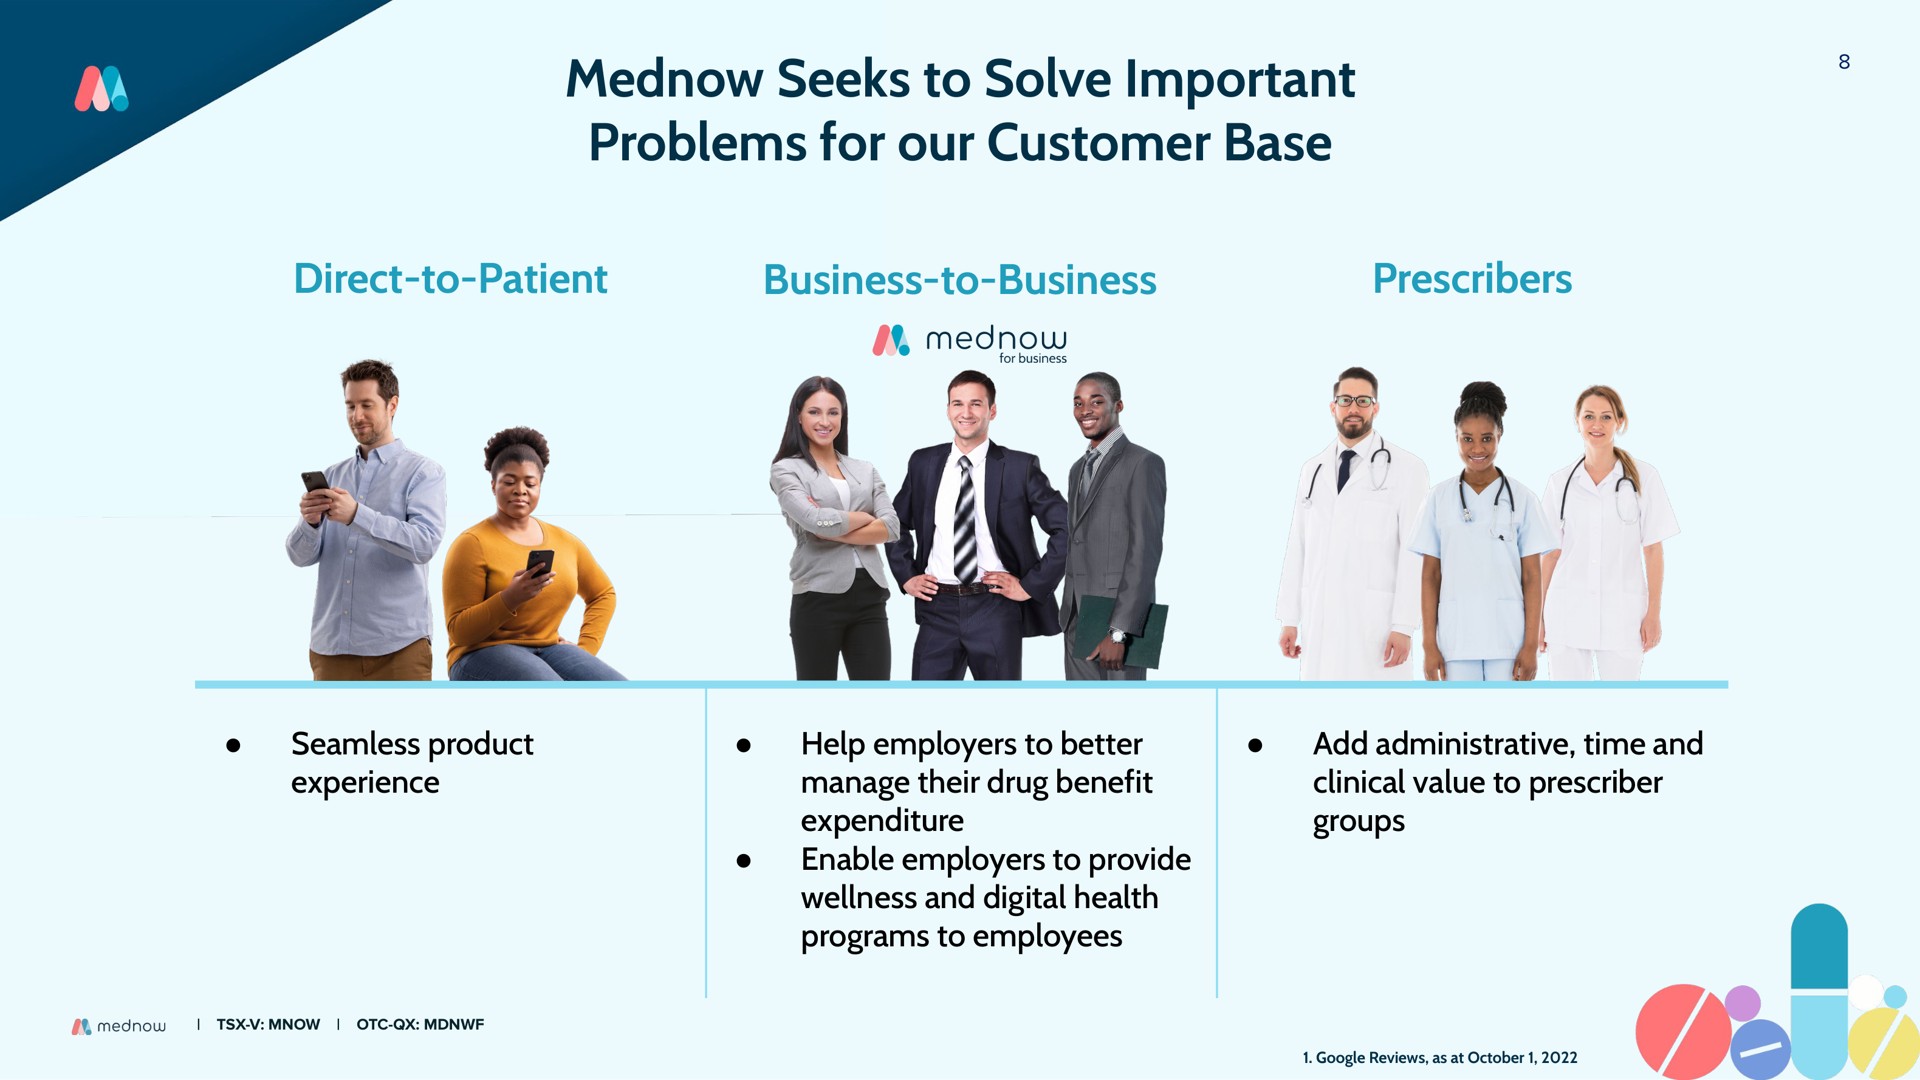 seeks to solve important problems for our customer base | Mednow